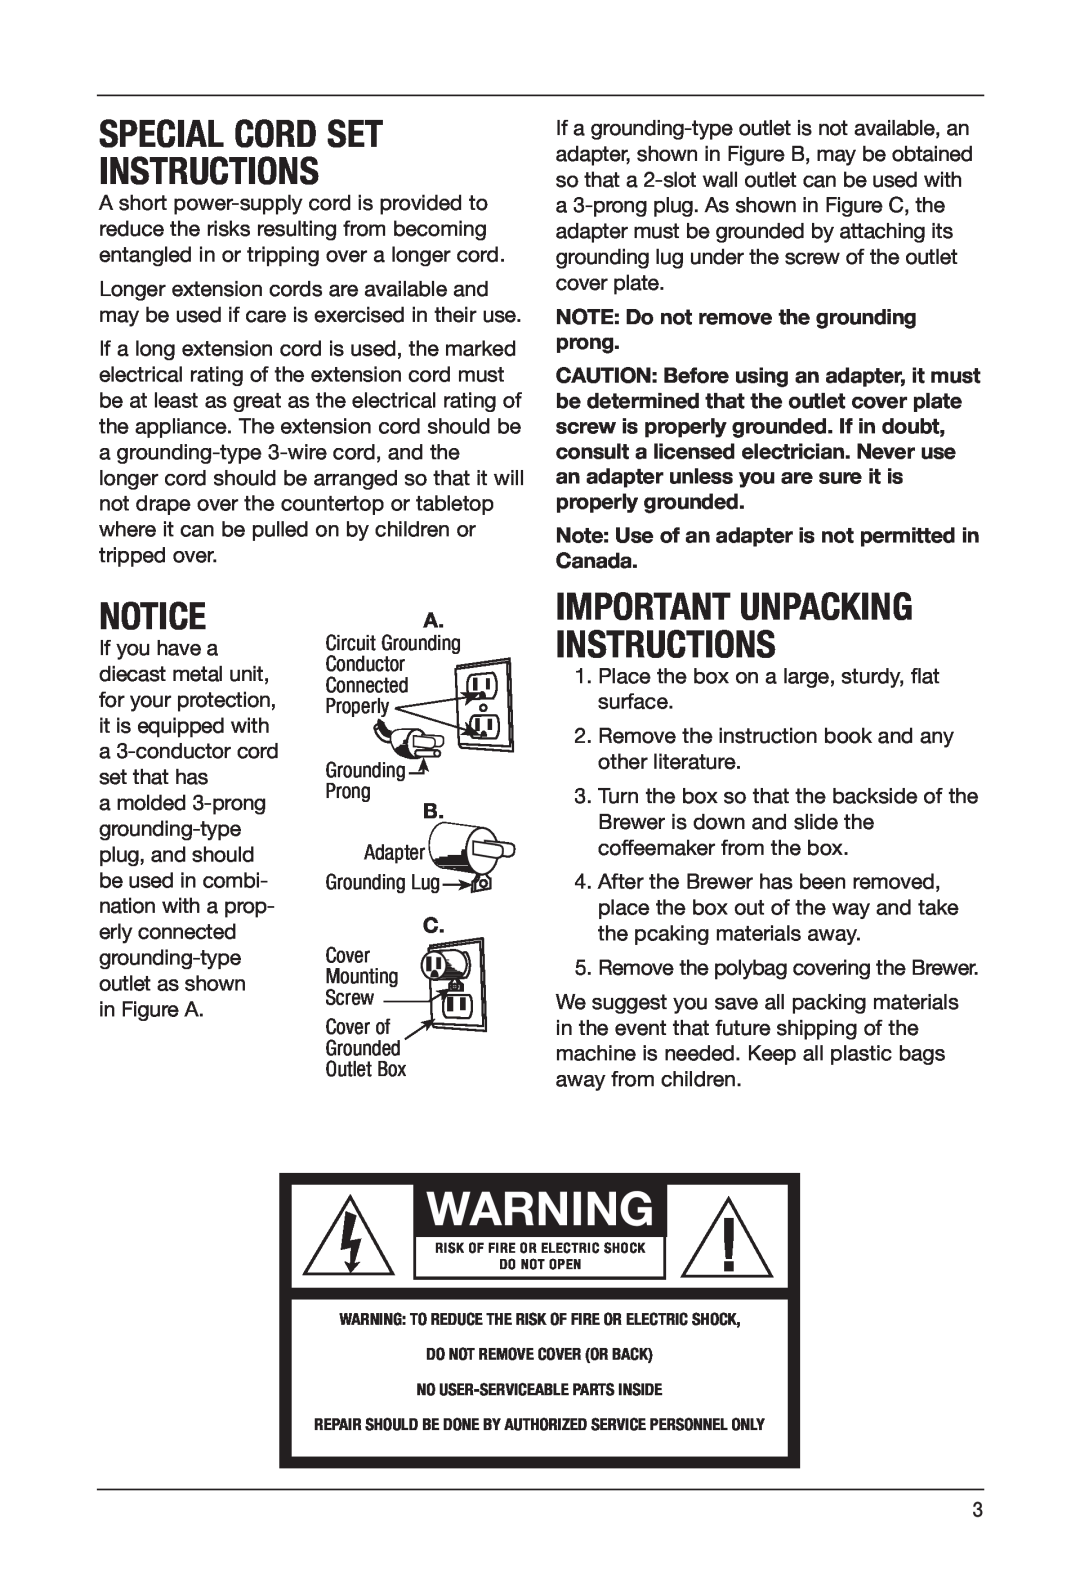 Keurig SS-700BK Special Cord Set Instructions, Important Unpacking Instructions, NOTE Do not remove the grounding prong 